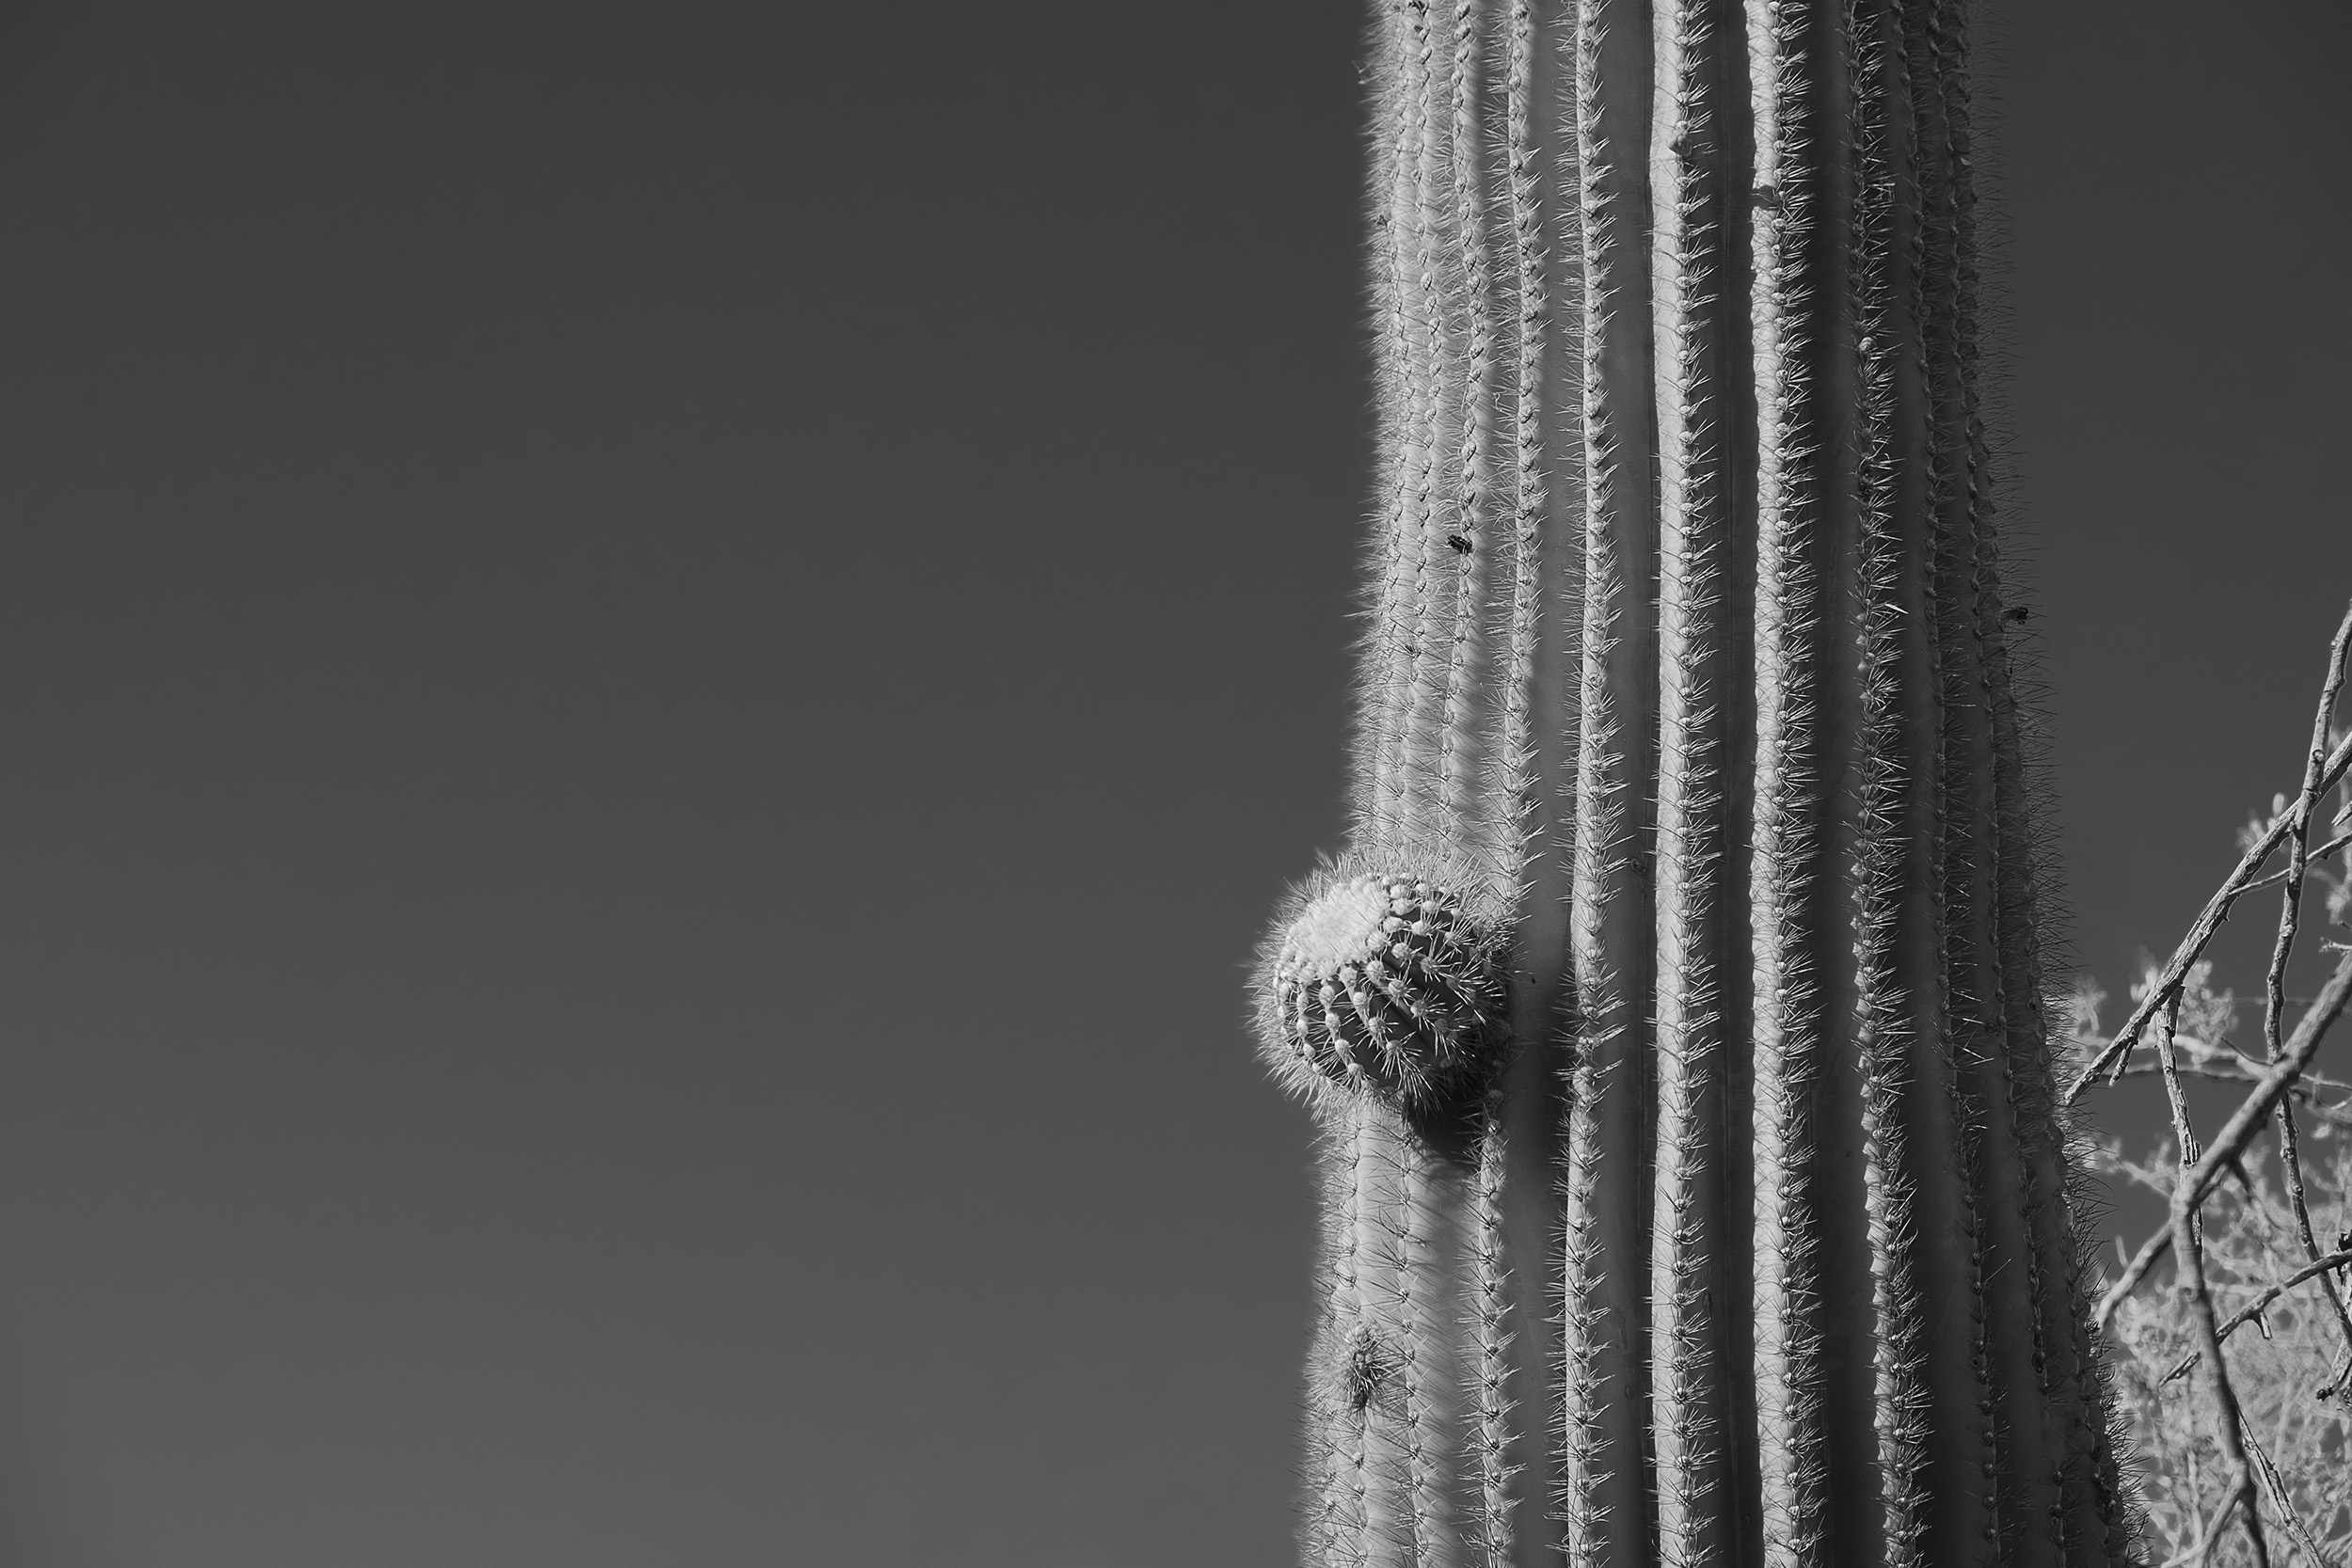 XE2_Tucson_May08_23_4236_2500px